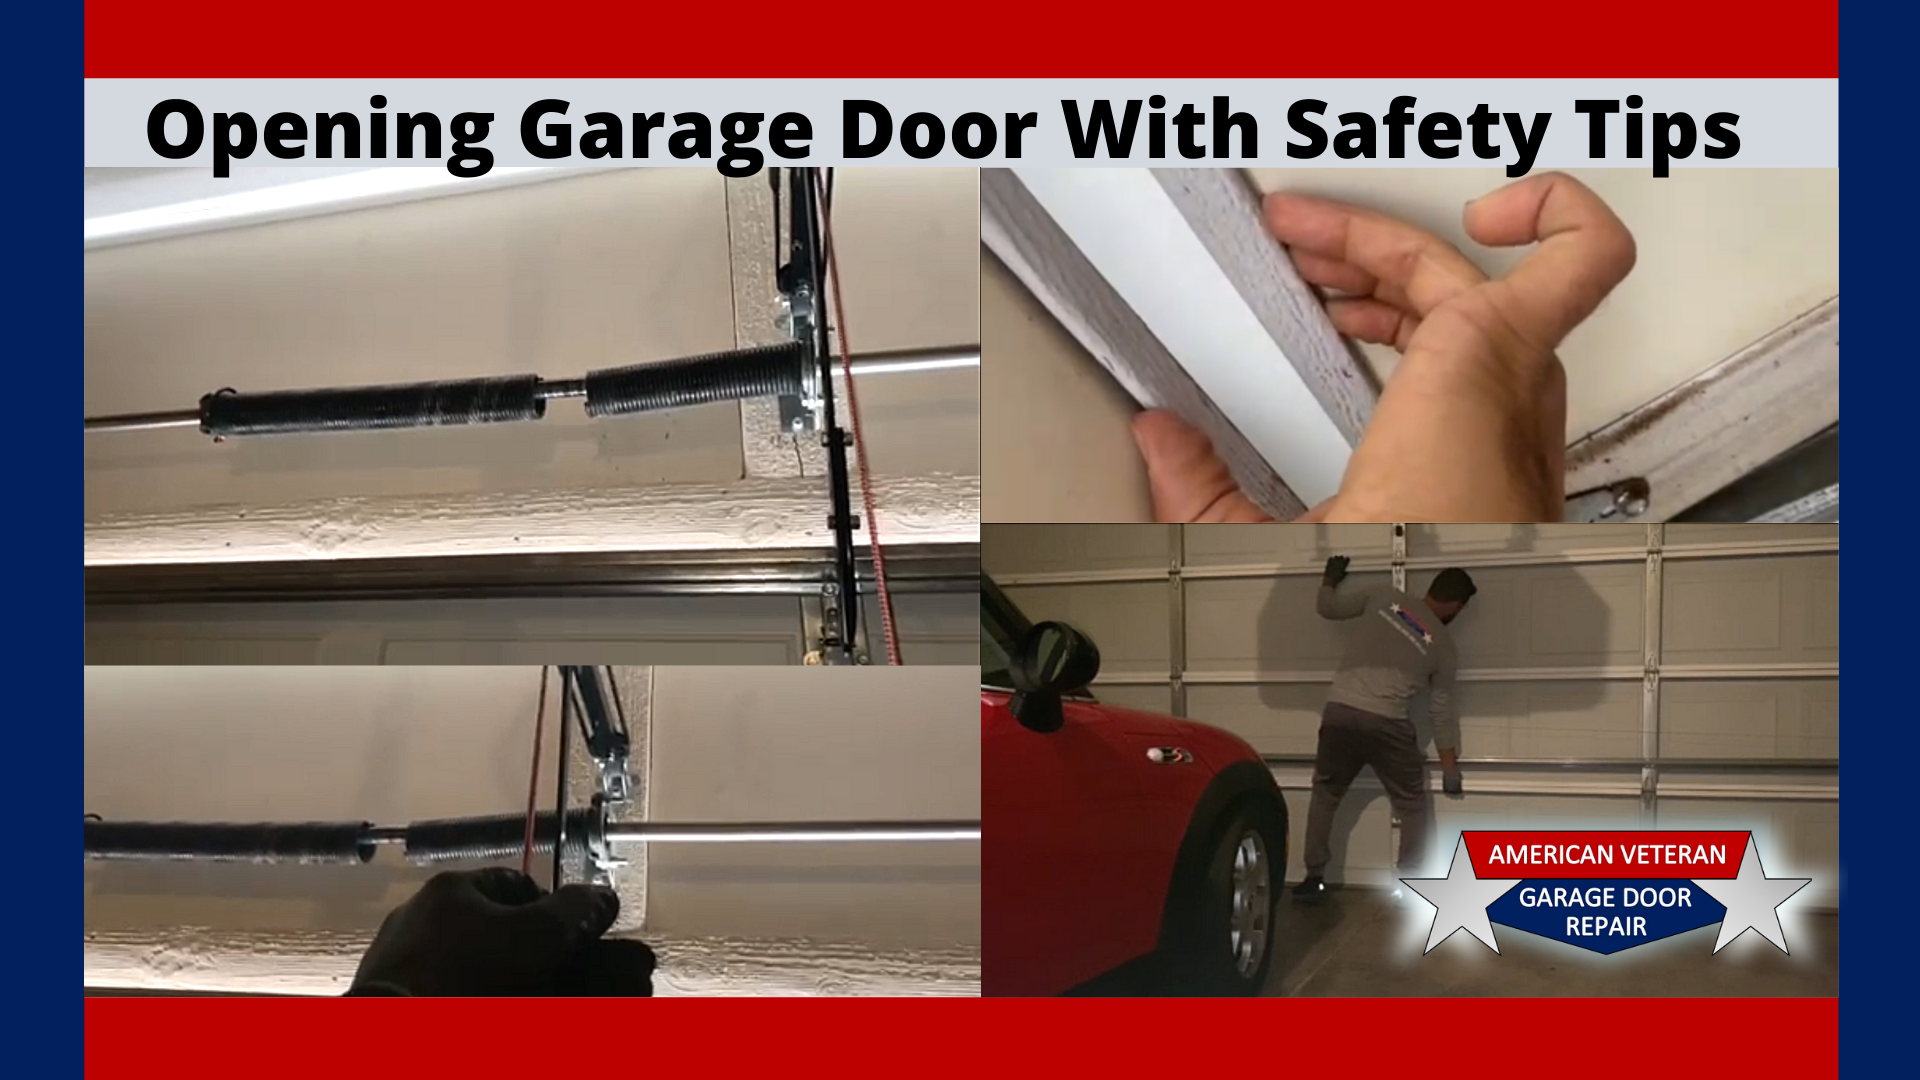 Opening Your Garage Door With Safety Tips